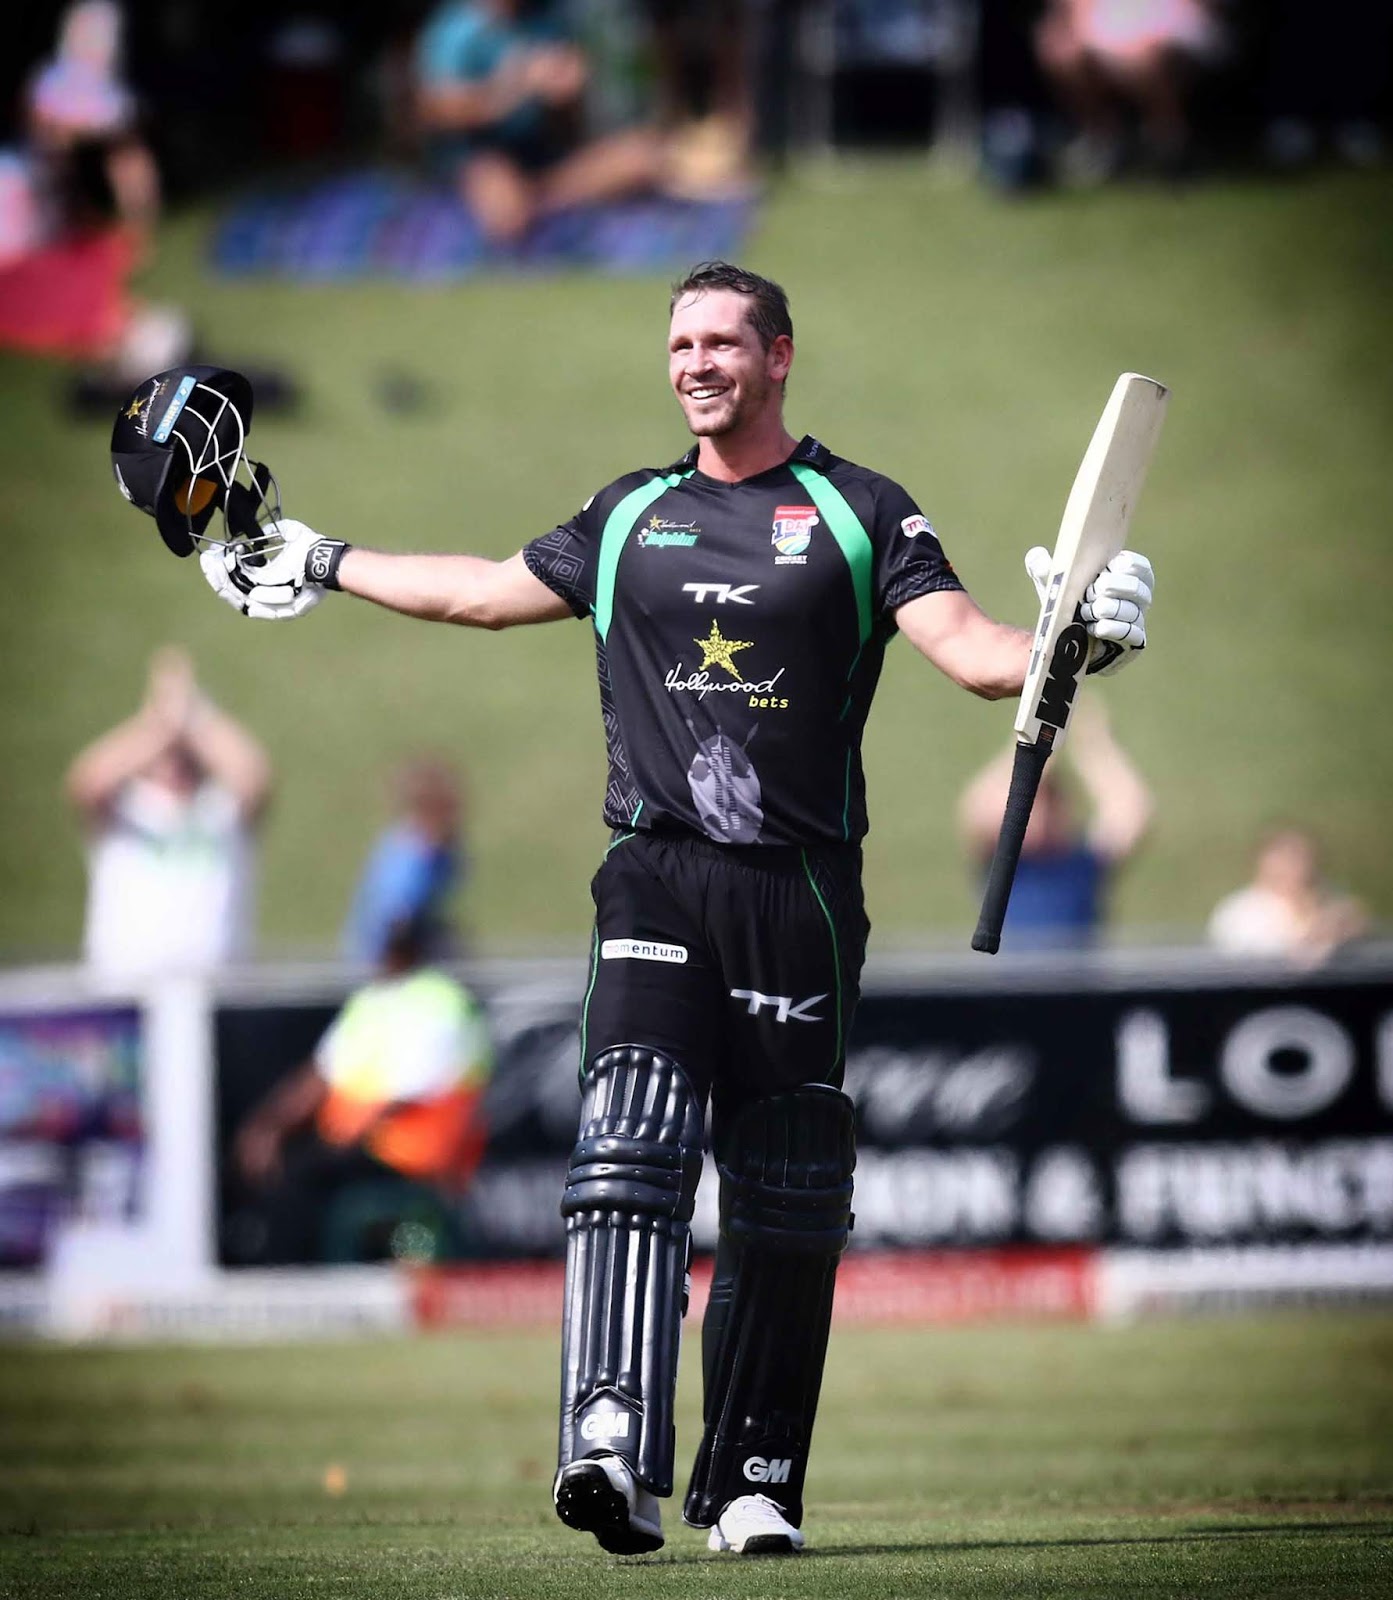 Sarel Erwee celebrating a century for the Hollywoodbets Dolphins in the Momentum One Day Cup in 2019